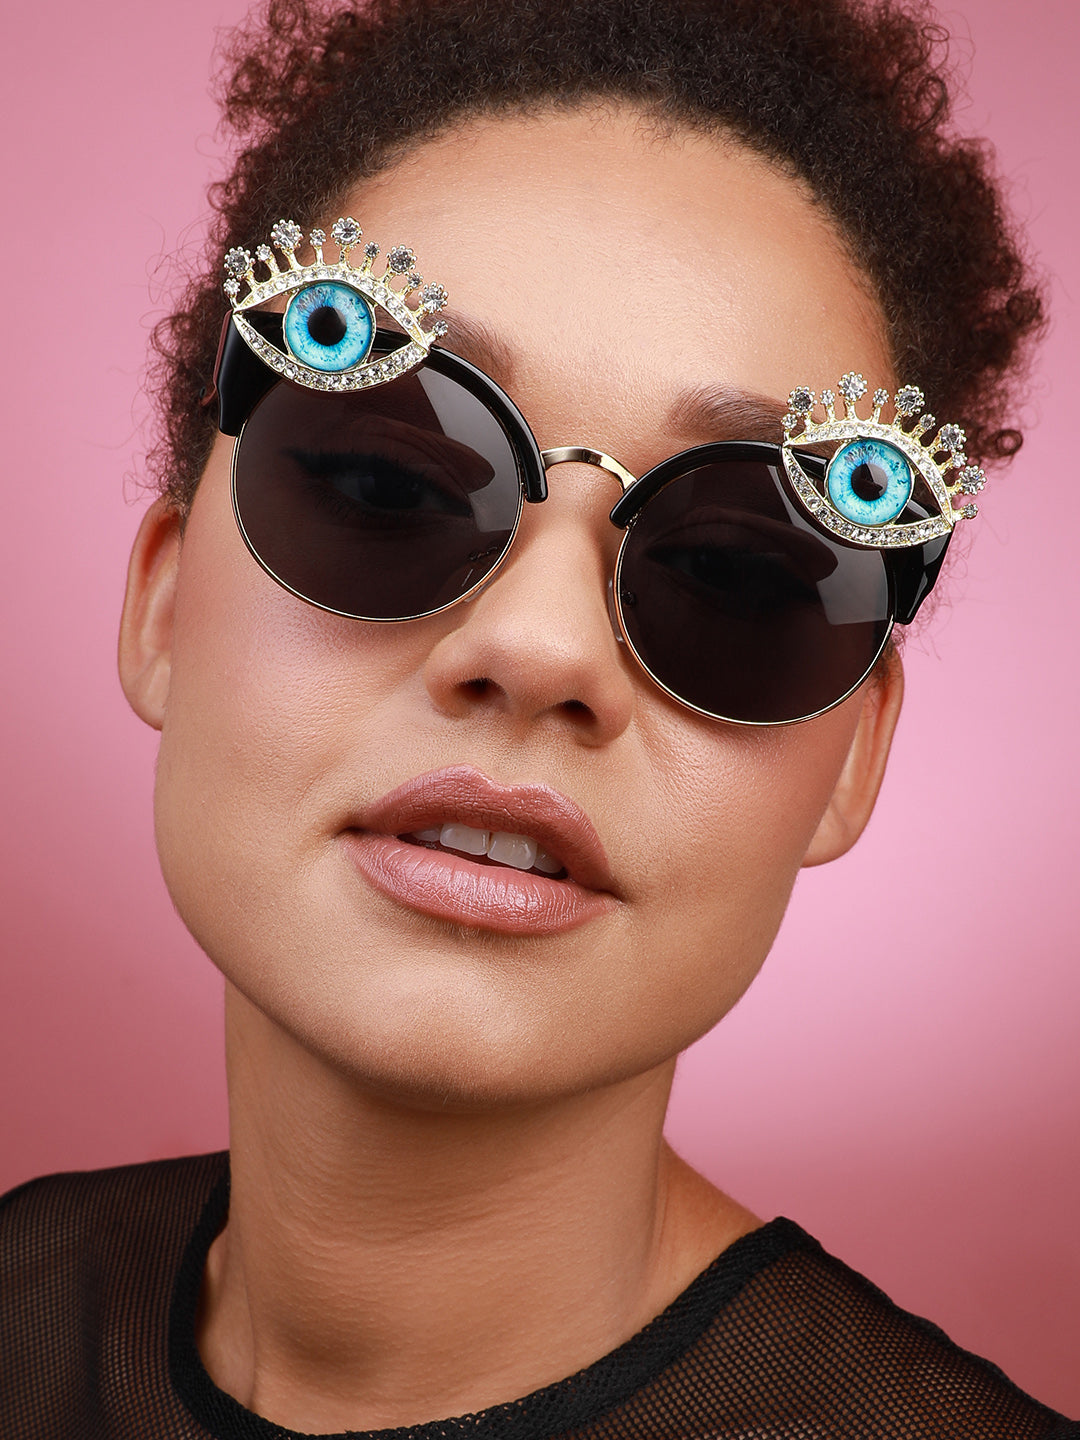 Statement Sunnies: Stand Out In Style